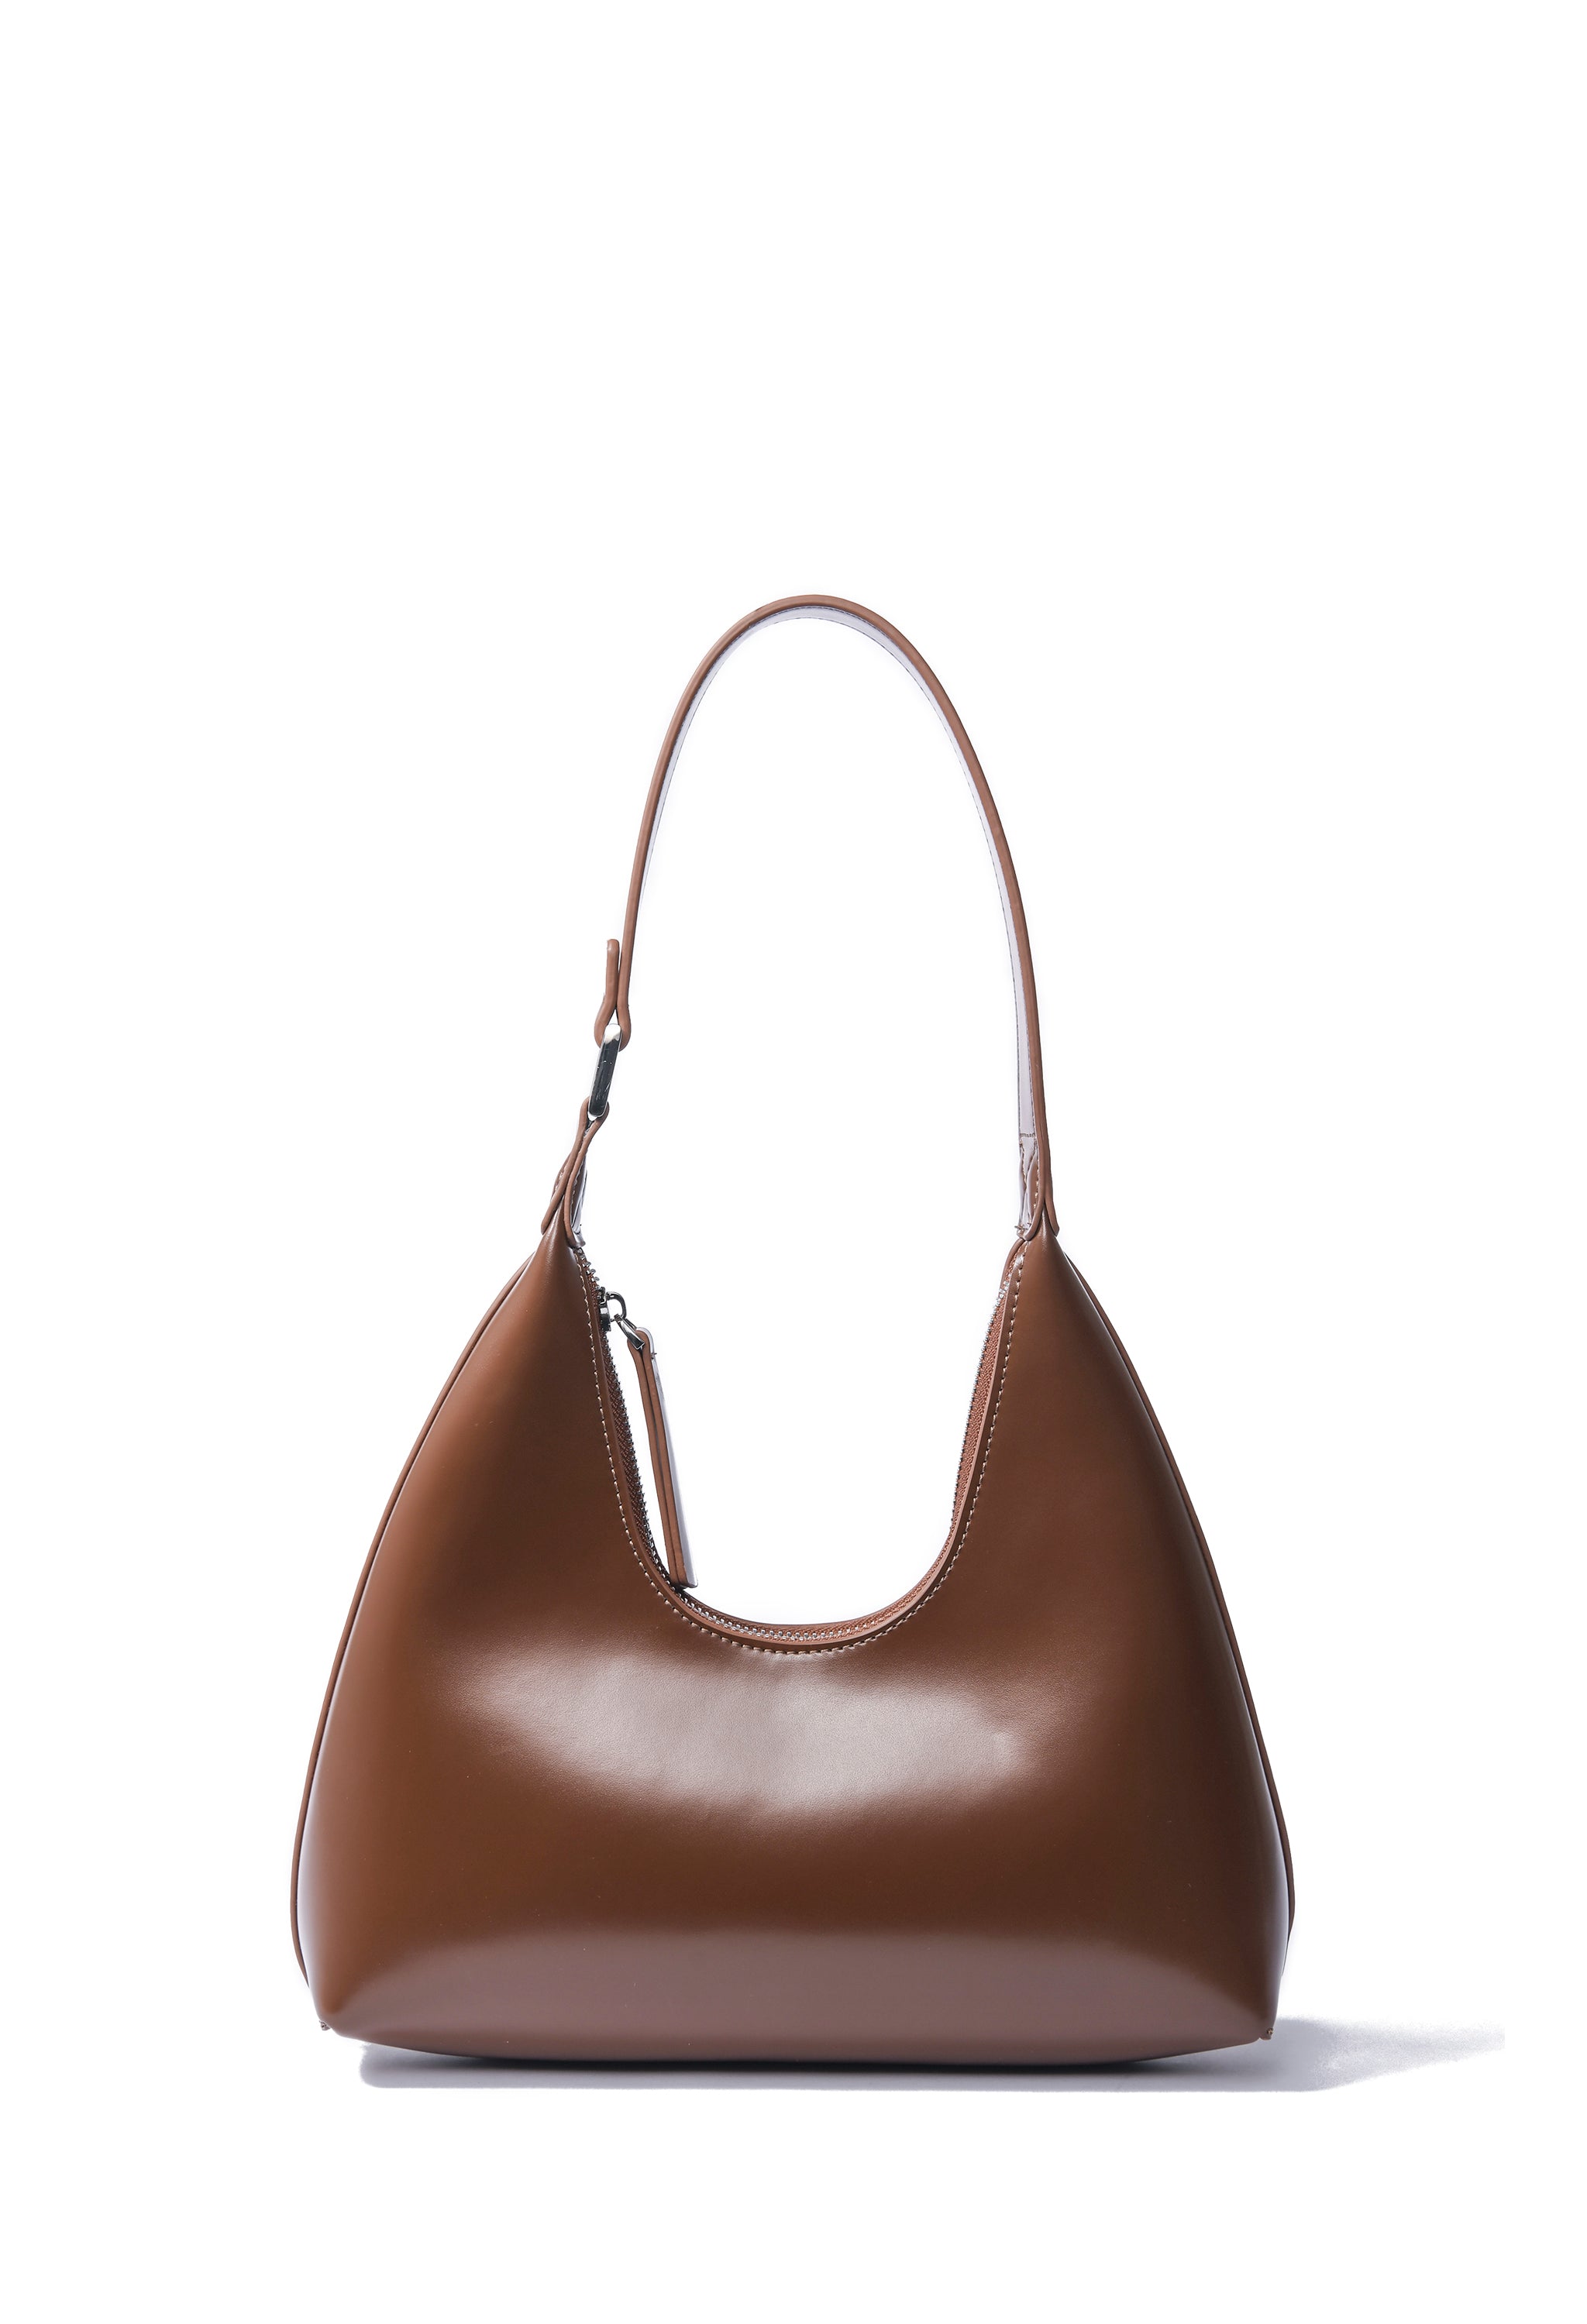 Alexia Bag in smooth leather, Caramel BOB ORE blue collection on sale 2022